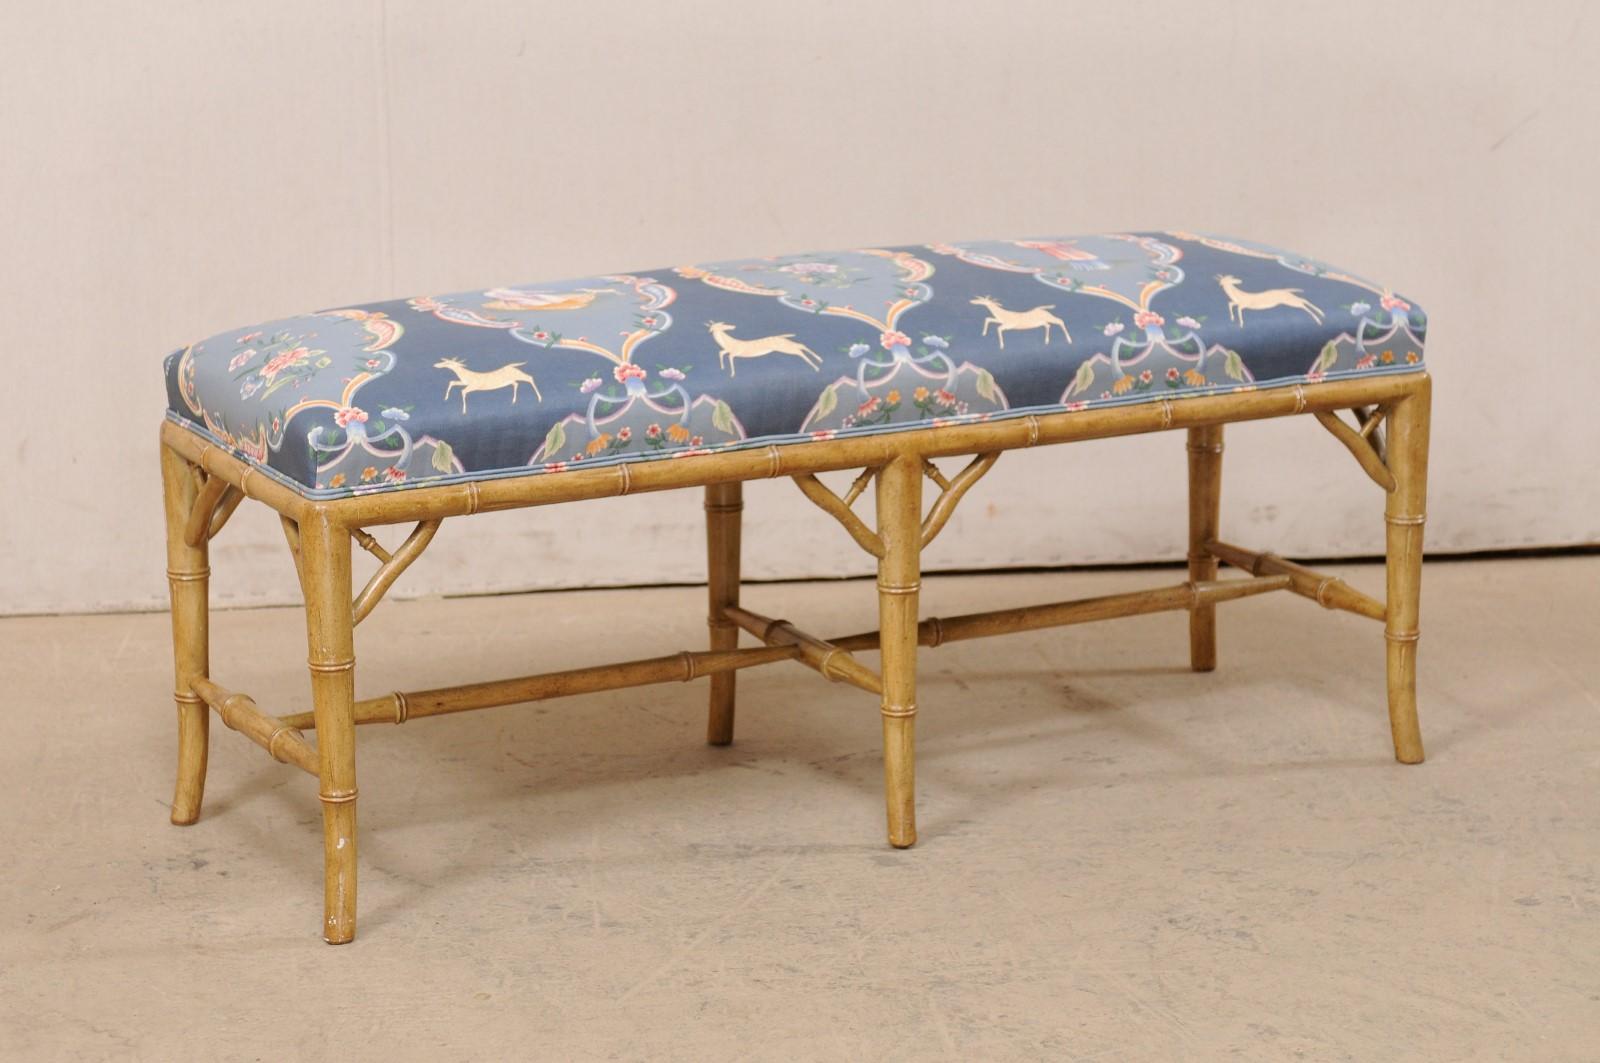 A vintage American faux-bamboo wooden bench with upholstered seat. This cute little bench is approximately 3.5 foot long, and has a wood frame, which has been carved to mimic the design of bamboo. The faux bamboo lines the bottom seat rail, which is